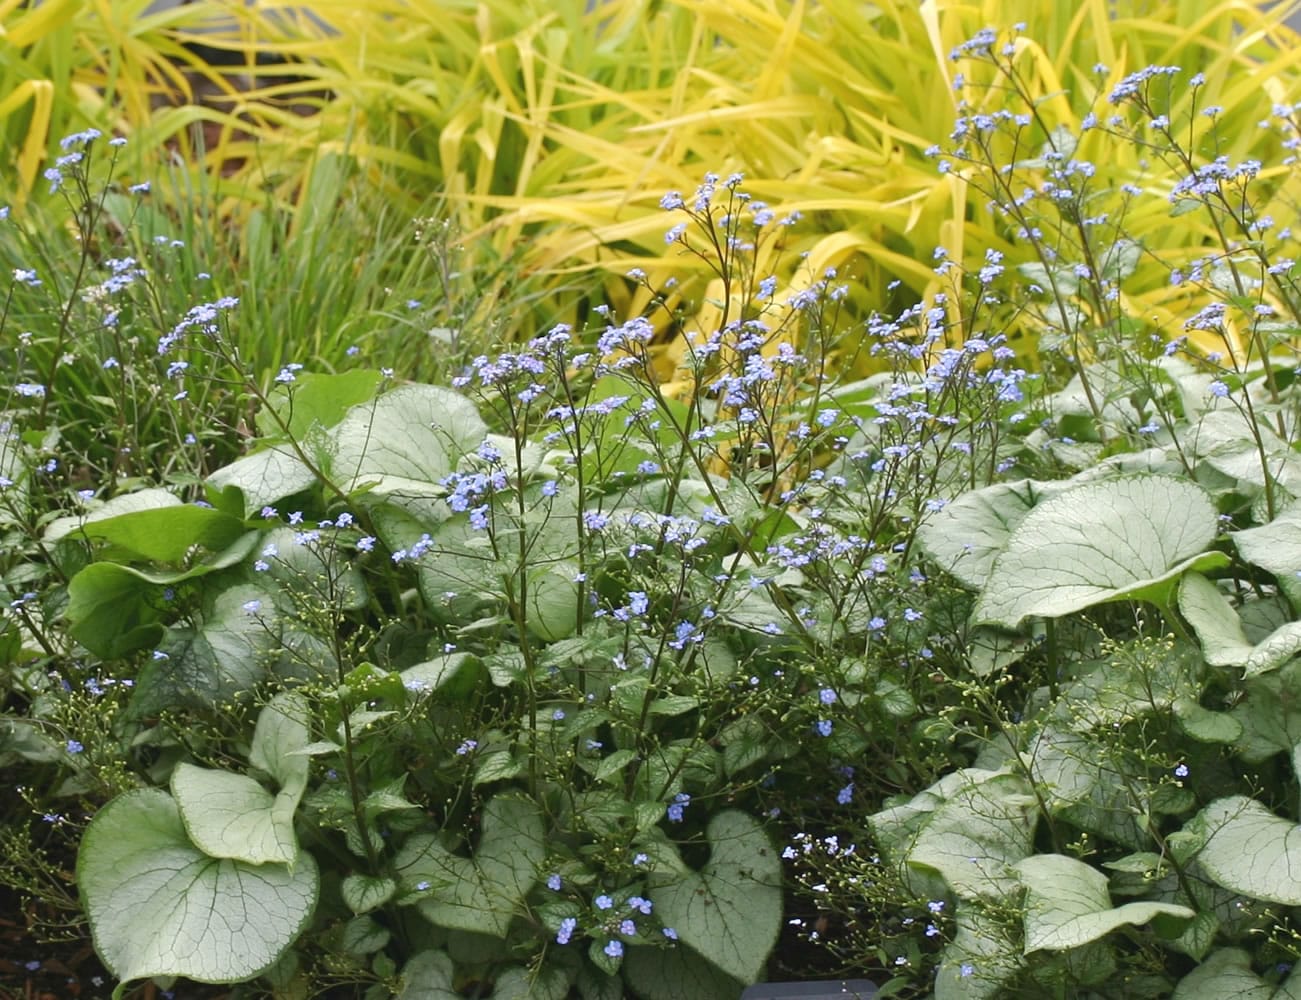 Brunnera 'Looking Glass' sports pale blue, forget-me-not flowers above a sea of silver-white foliage with contrasting green veins.